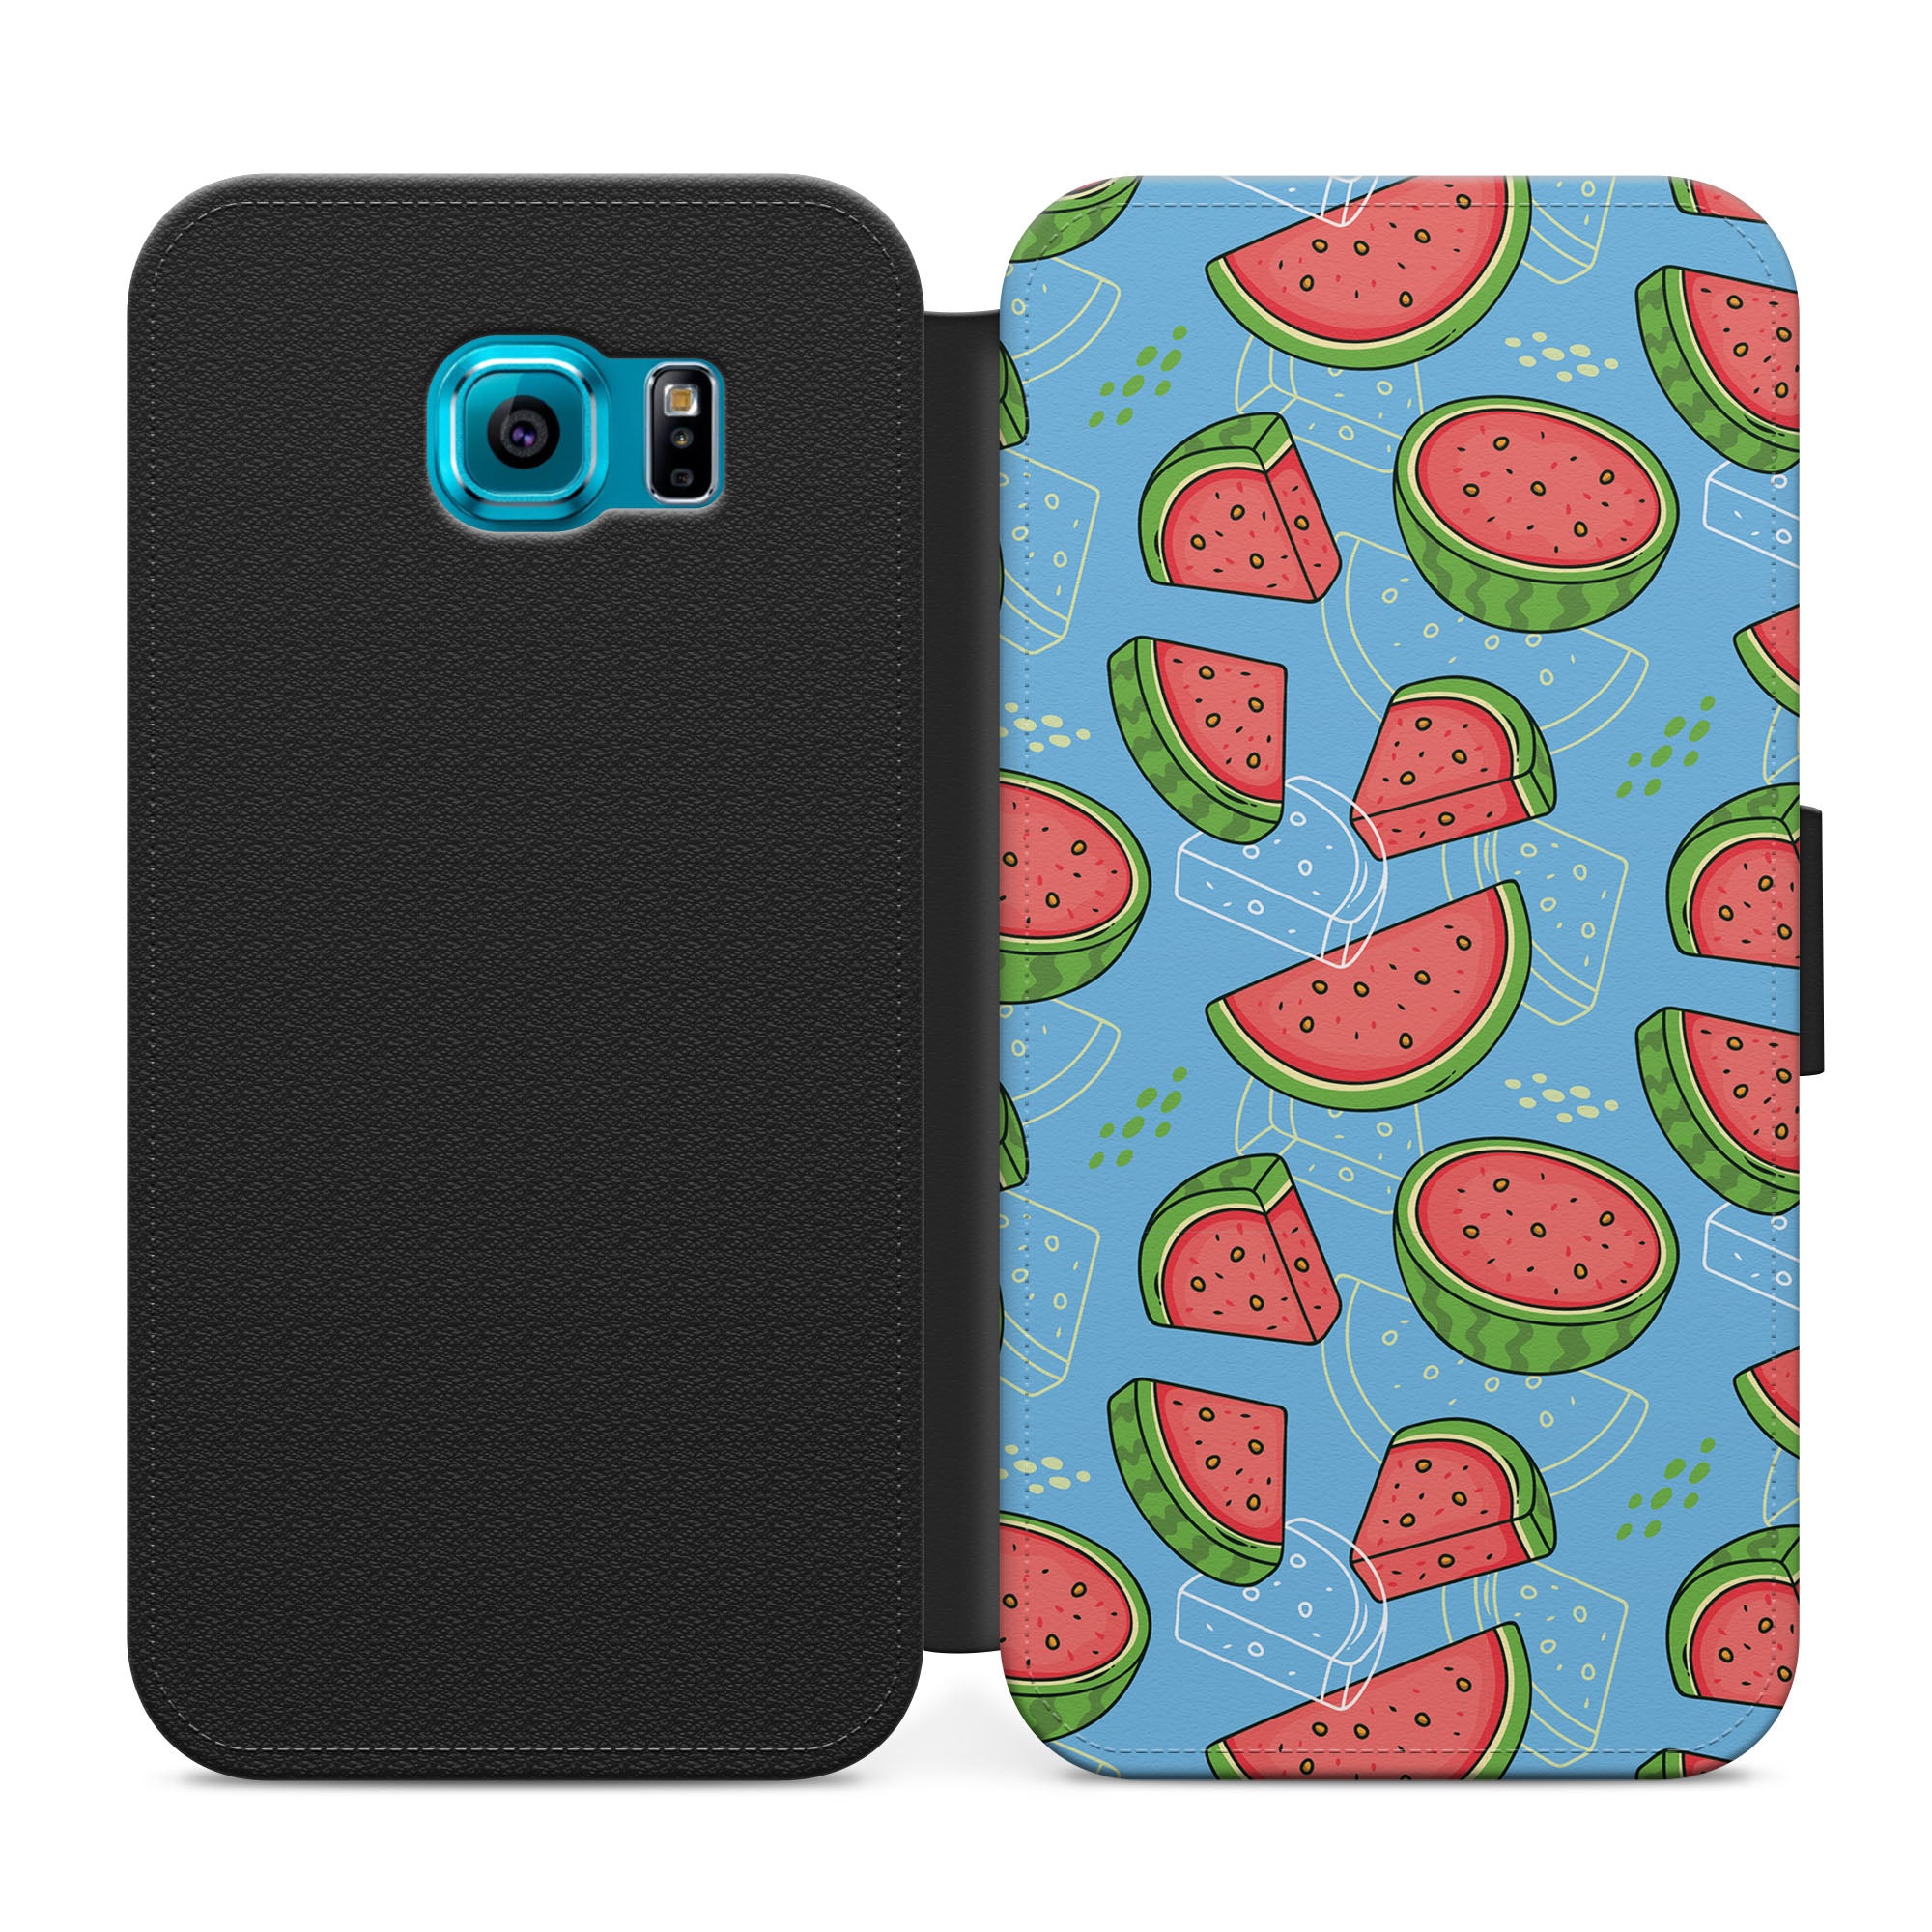 Blue Watermelon Faux Leather Flip Case Wallet for iPhone / Samsung